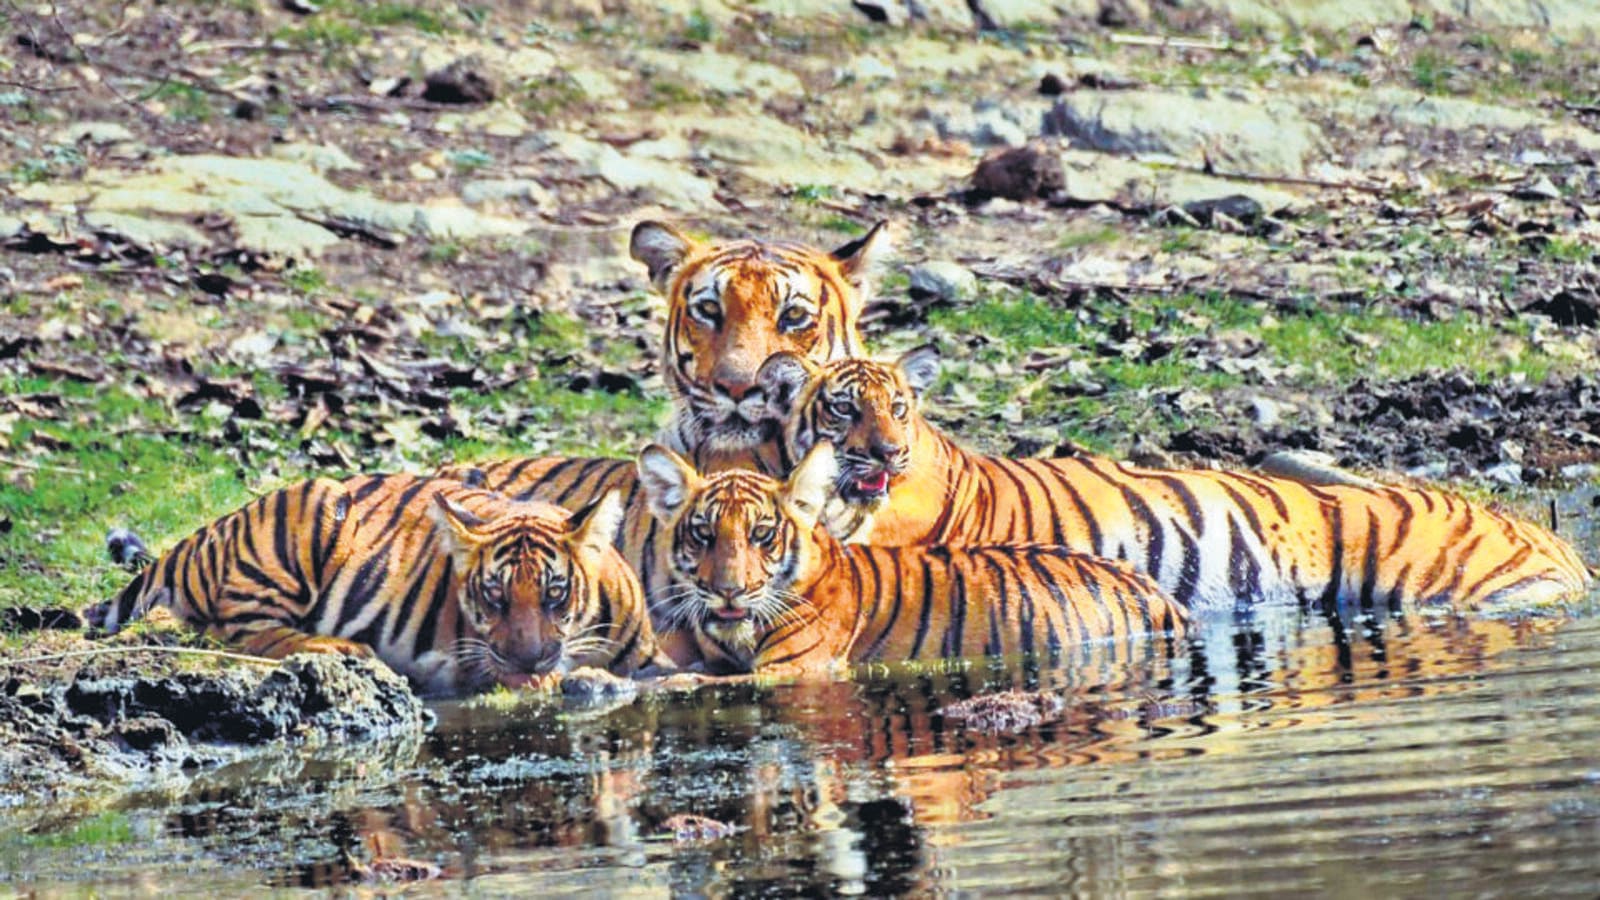 Tiger Creek Animal Sanctuary to introduce three tiger cubs to public